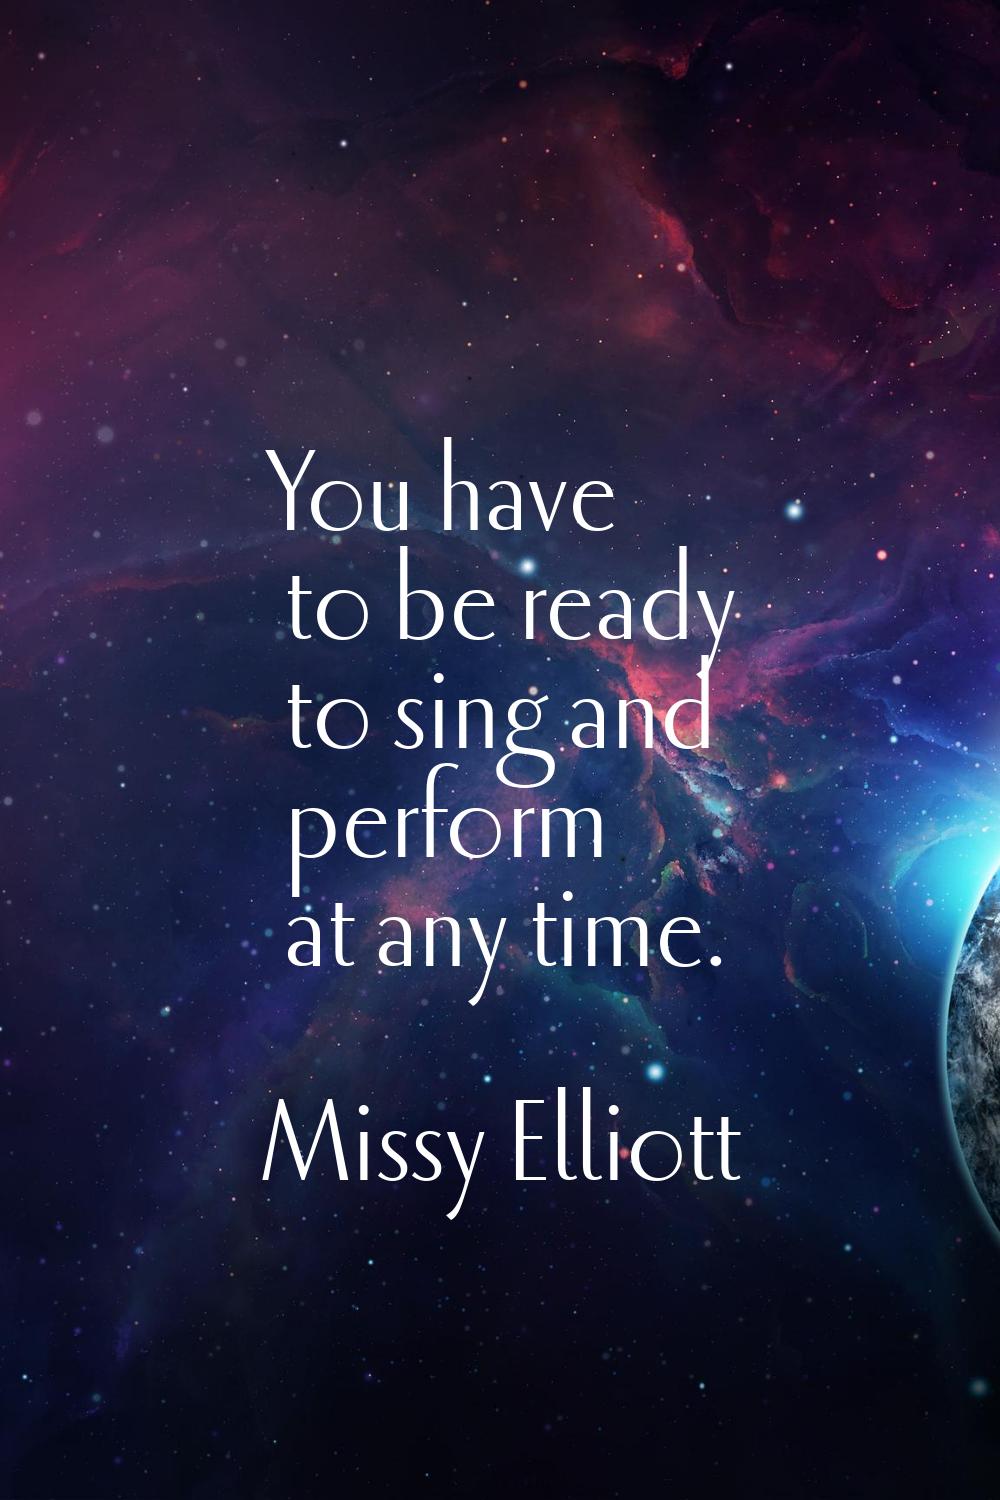 You have to be ready to sing and perform at any time.